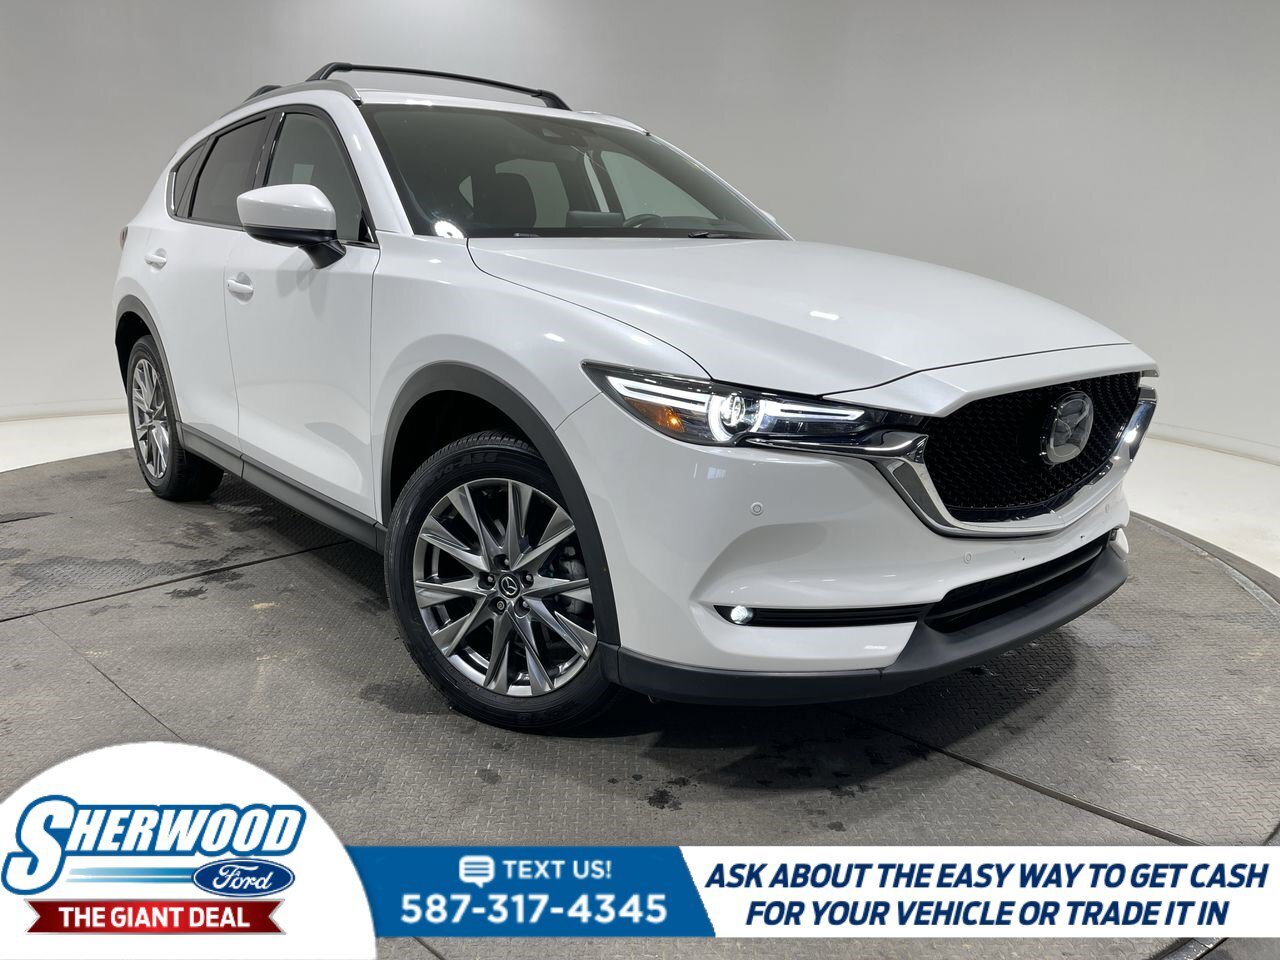 2021 Mazda CX-5 SIGNATURE- $0 Down $165 Weekly TWO SETS OF TIRES